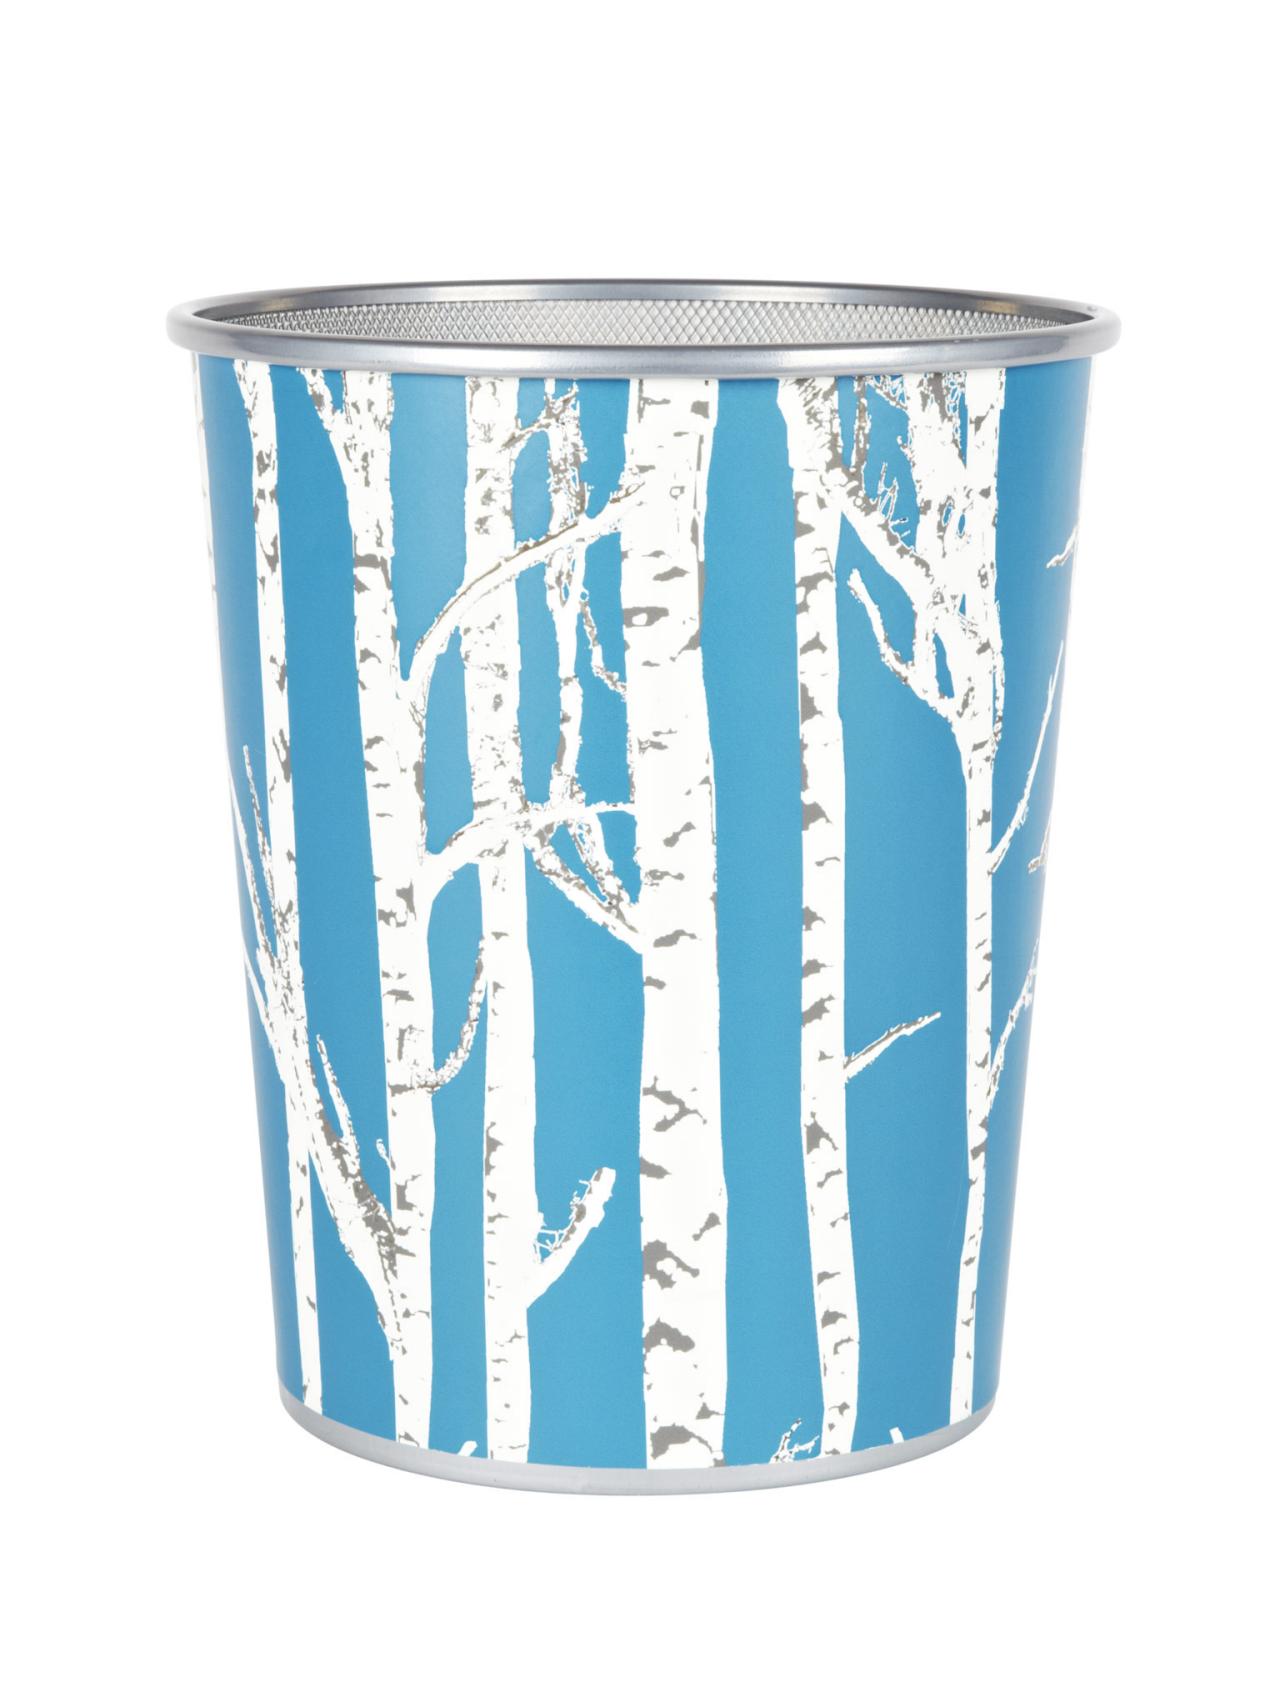 How To: Wallpaper Wrapped Waste Can